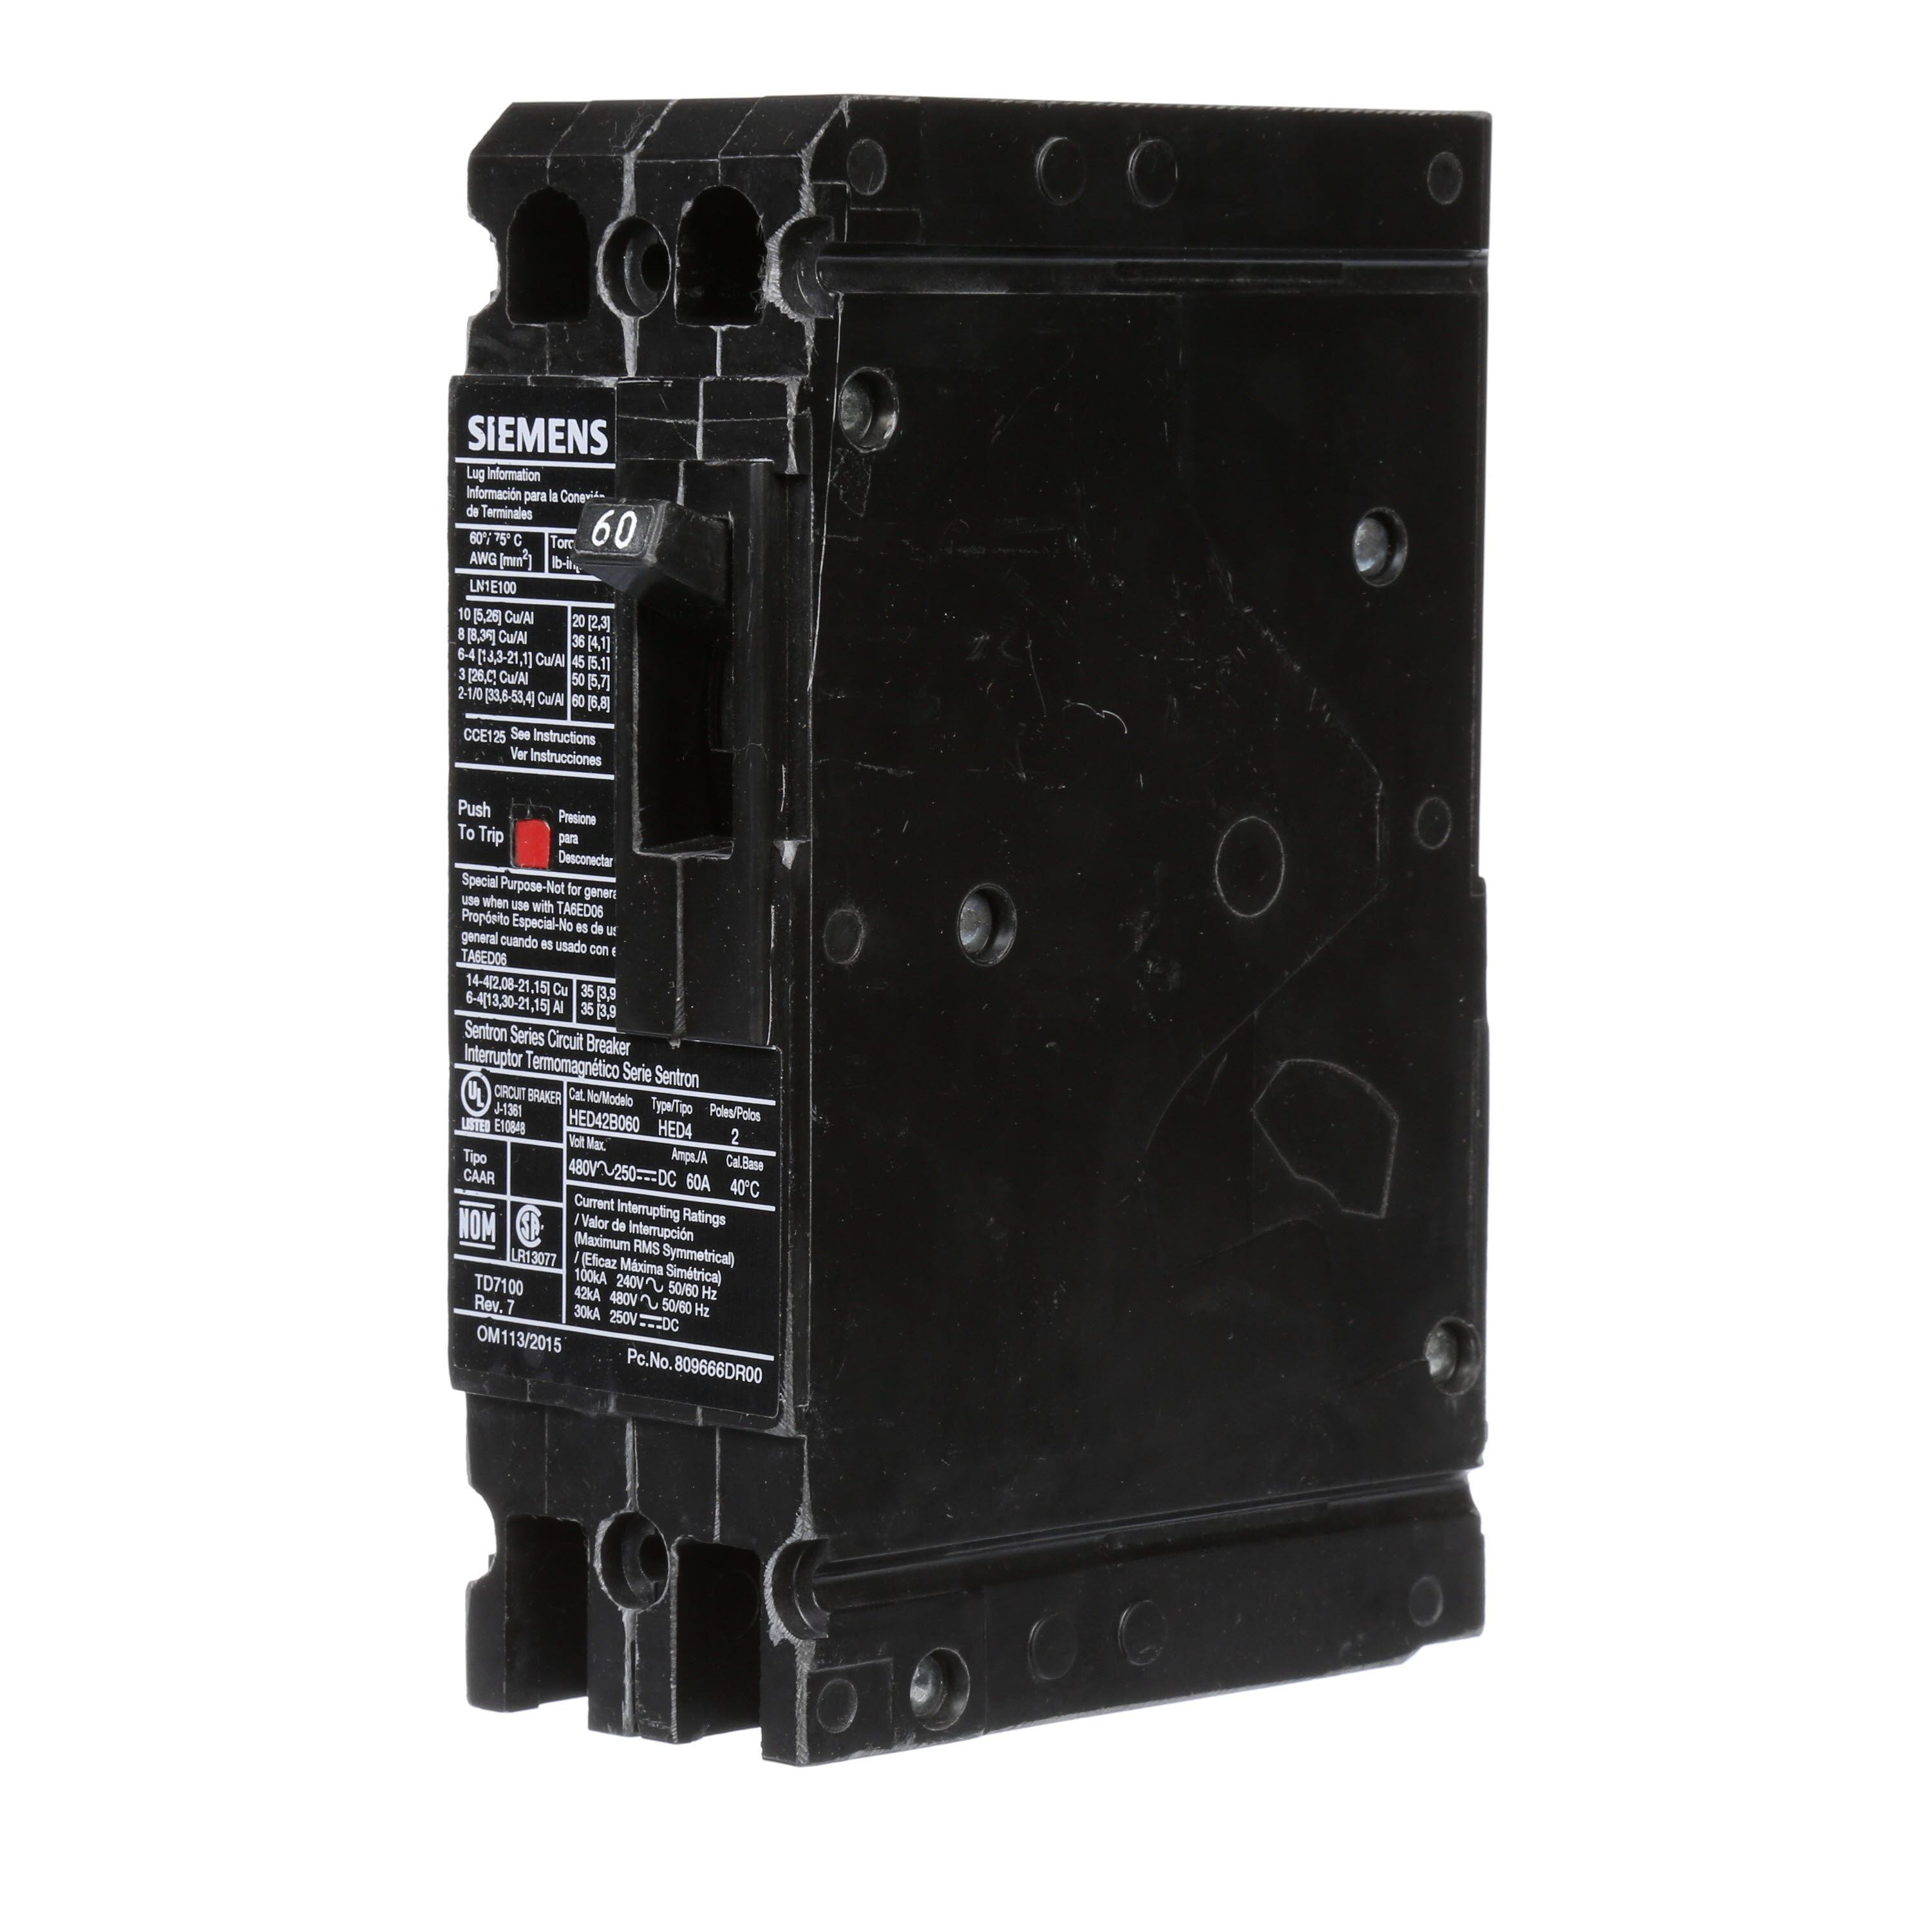 SIEMENS LOW VOLTAGE SENTRON MOLDED CASE CIRCUIT BREAKER WITH THERMAL - MAGNETICTRIP UNIT. STANDARD 40 DEG C BREAKER ED FRAME WITH HIGH BREAKING CAPACITY. 60A 2-POLE (42KAIC AT 480V). NON-INTERCHANGEABLE TRIP UNIT. SPECIAL FEATURES LOAD LUGS ONLY (LN1E100) WIRE RANGE 10 - 1/0AWG (CU/AL). DIMENSIONS (W x H x D) IN 2.00x 6.4 x 3.92.